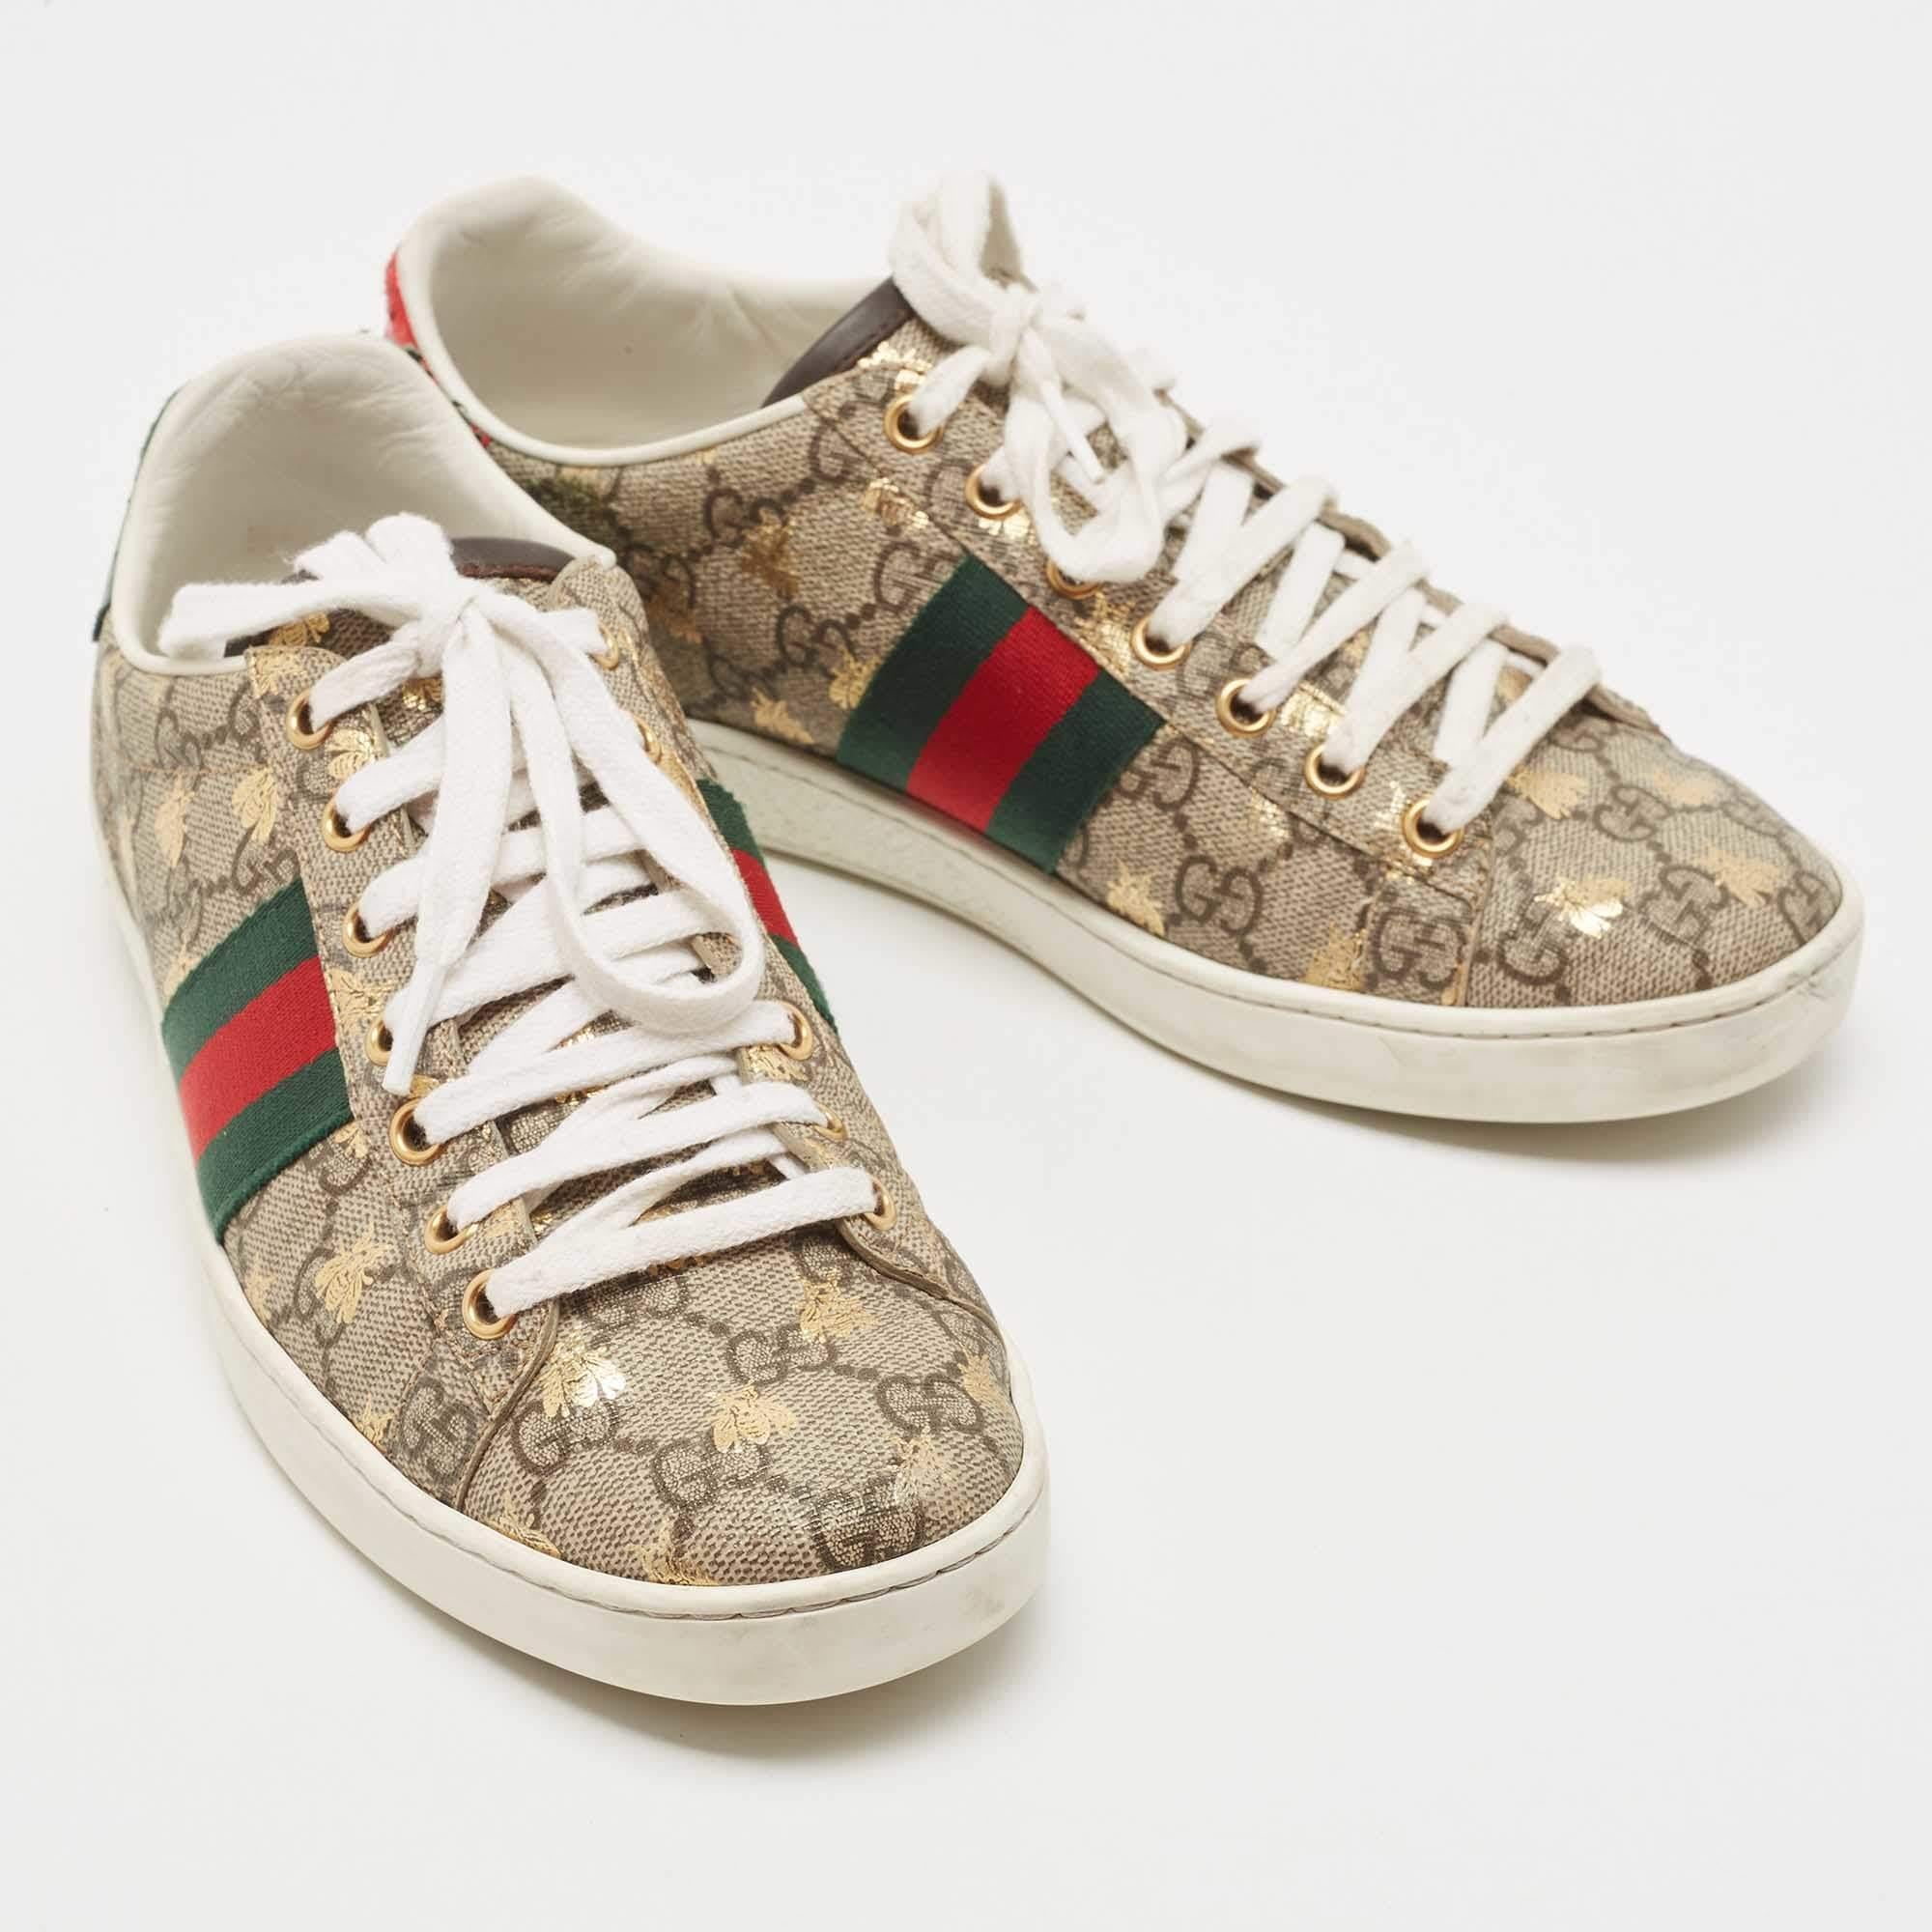 Gucci Brown/Beige GG Supreme Canvas Bee Print Ace Sneakers Size 38 1